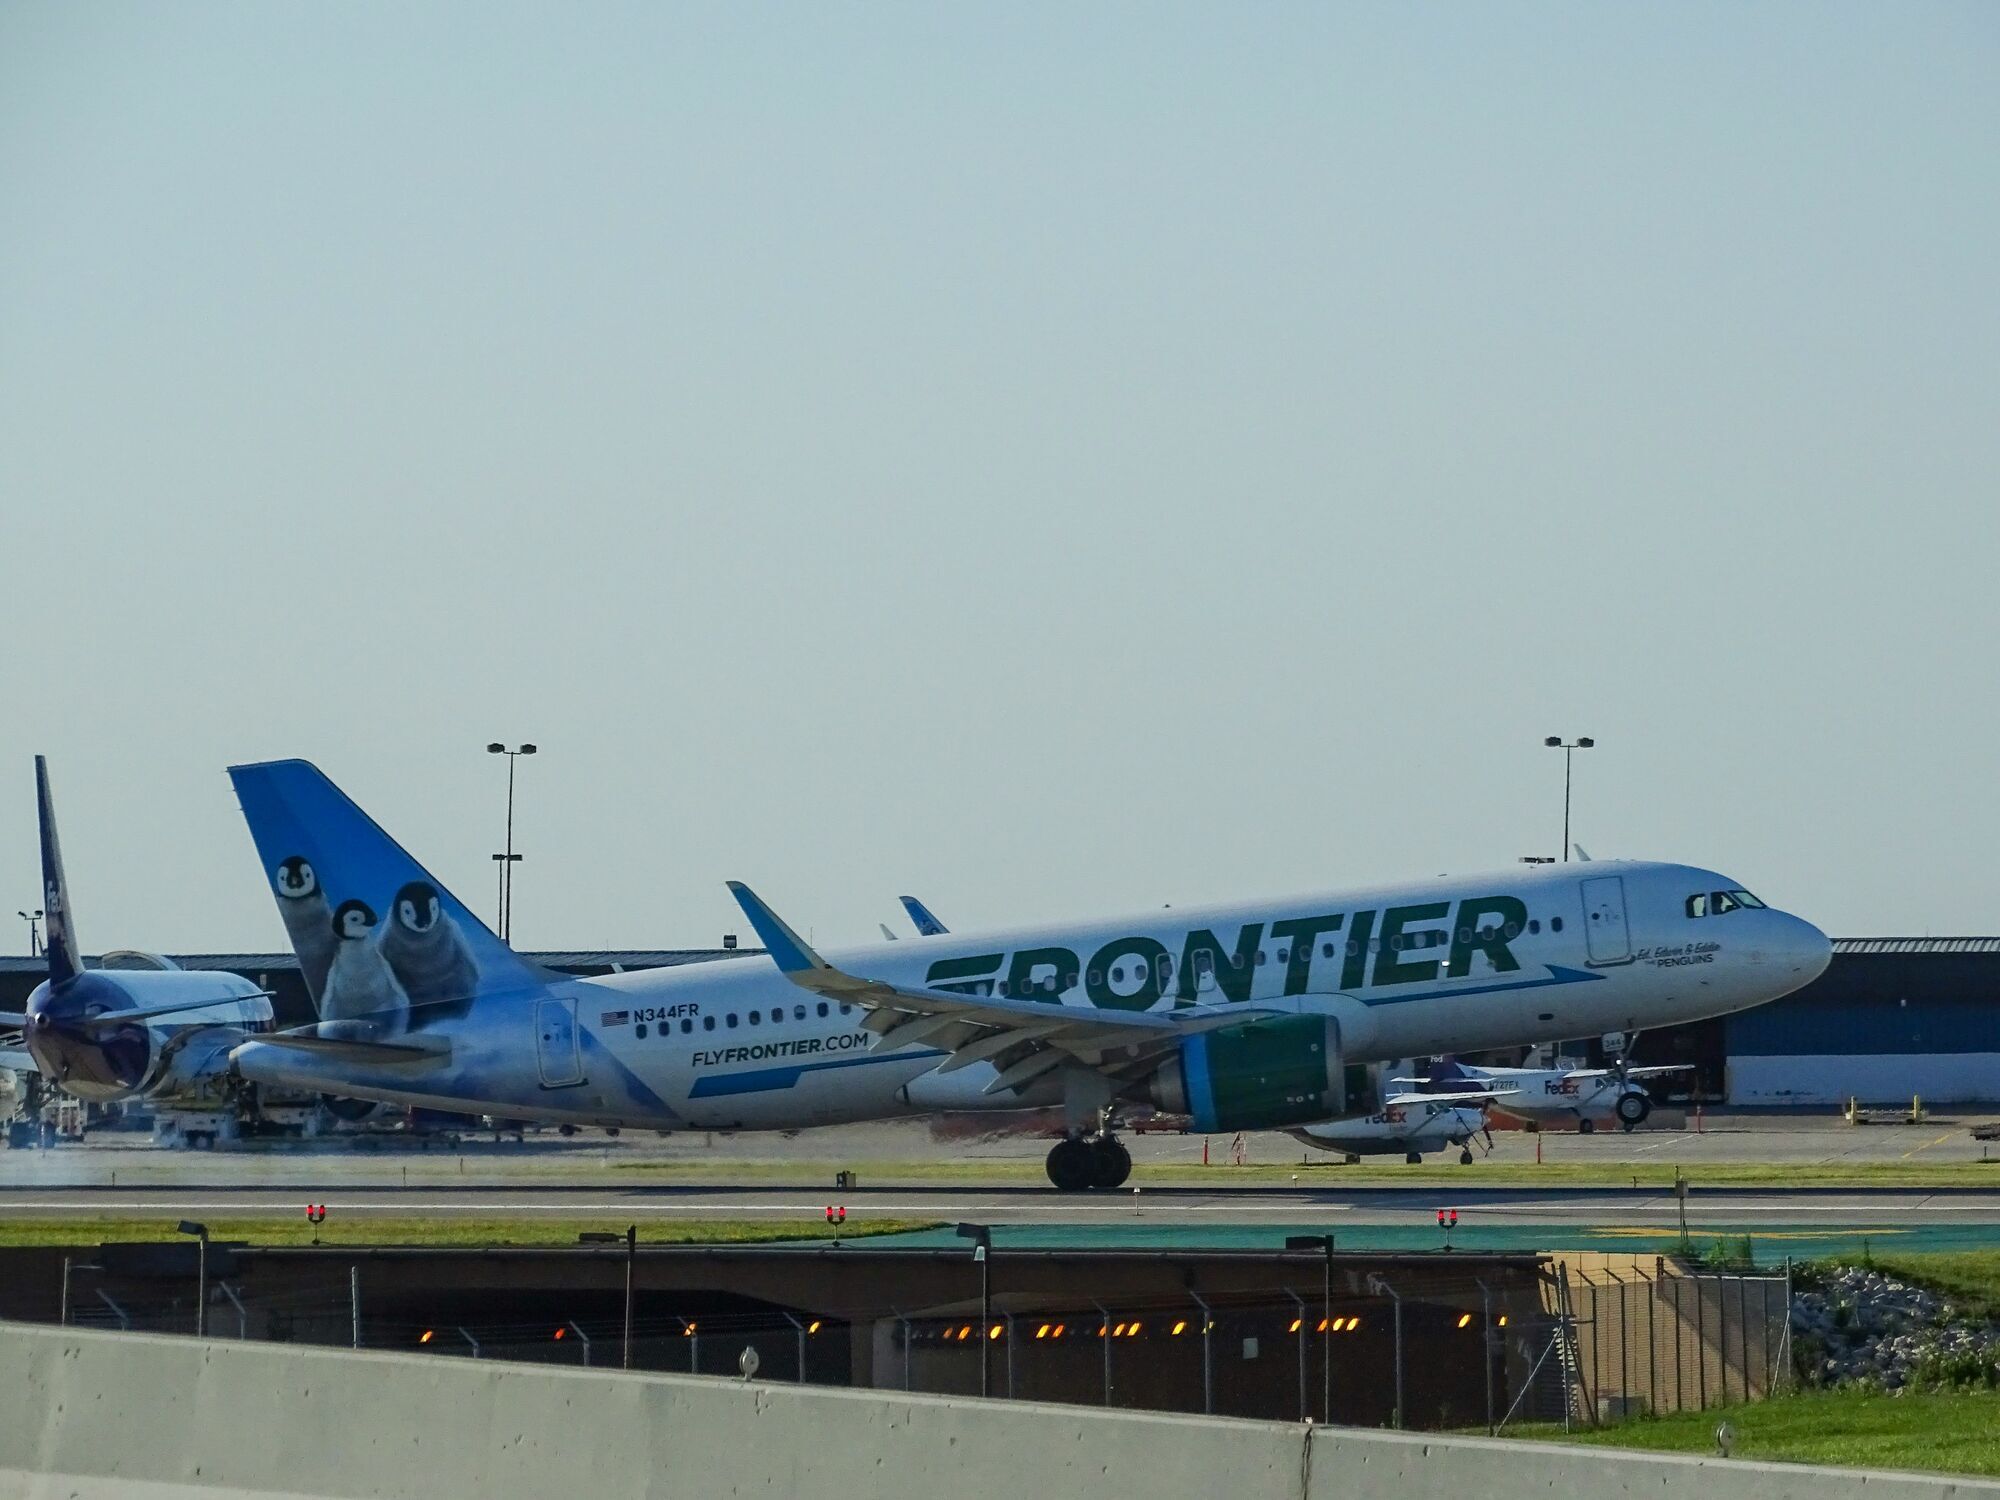 The woman from Philadelphia who stripped on a Frontier Airlines flight 2 months ago has been arrested and charged